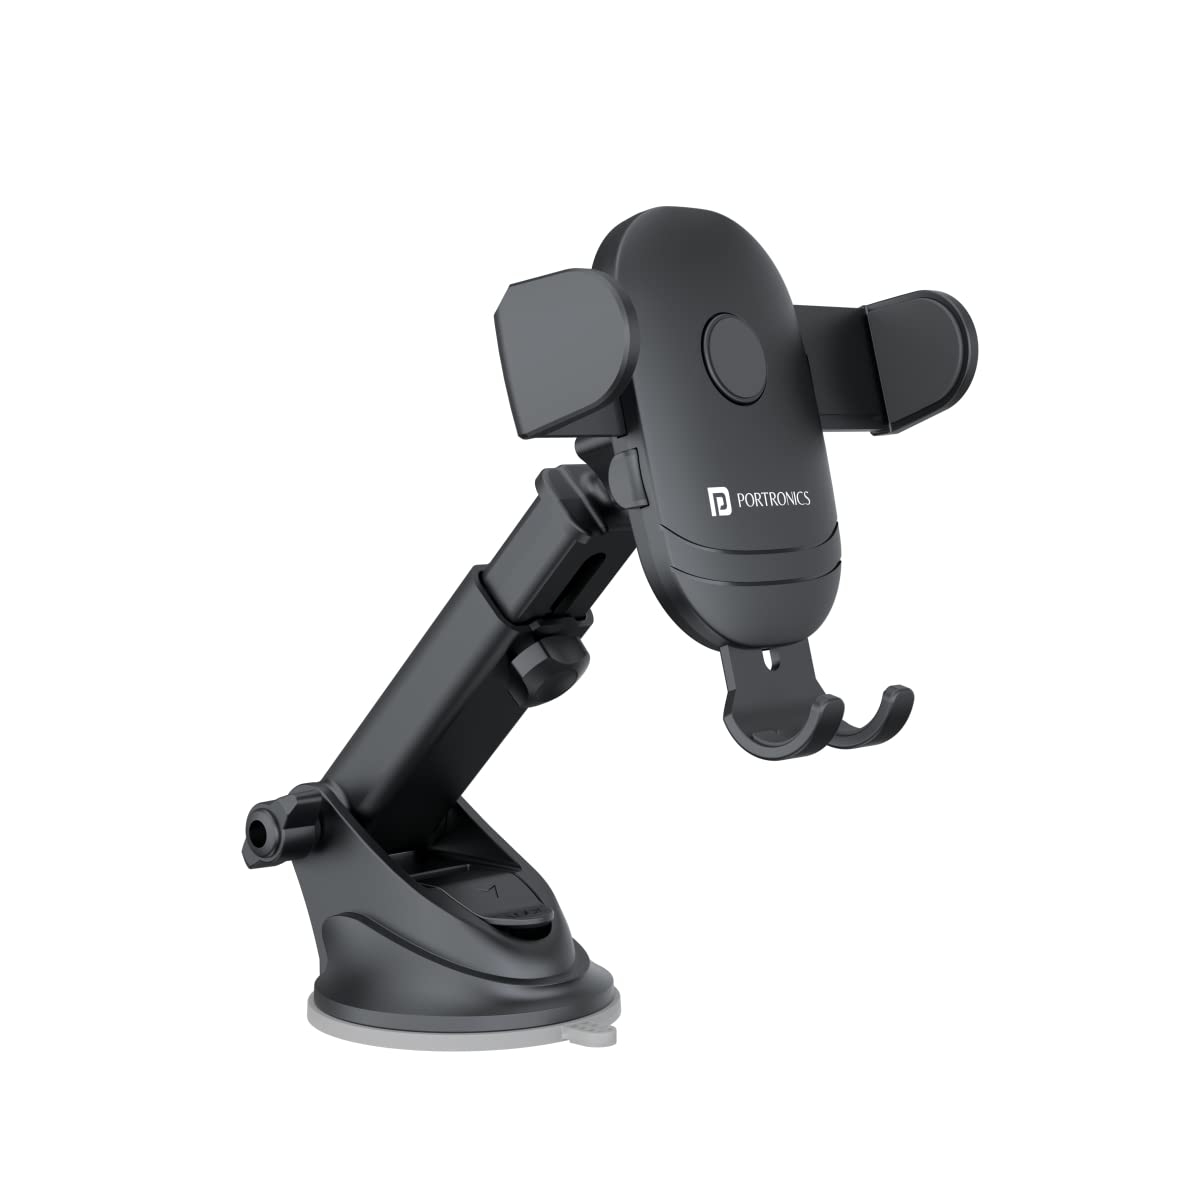 Portronics Car Mobile Phone Holder Stand for Dashboard & Windshield, Strong Suction Cup for 4 to 6 Devices (Clamp M2)